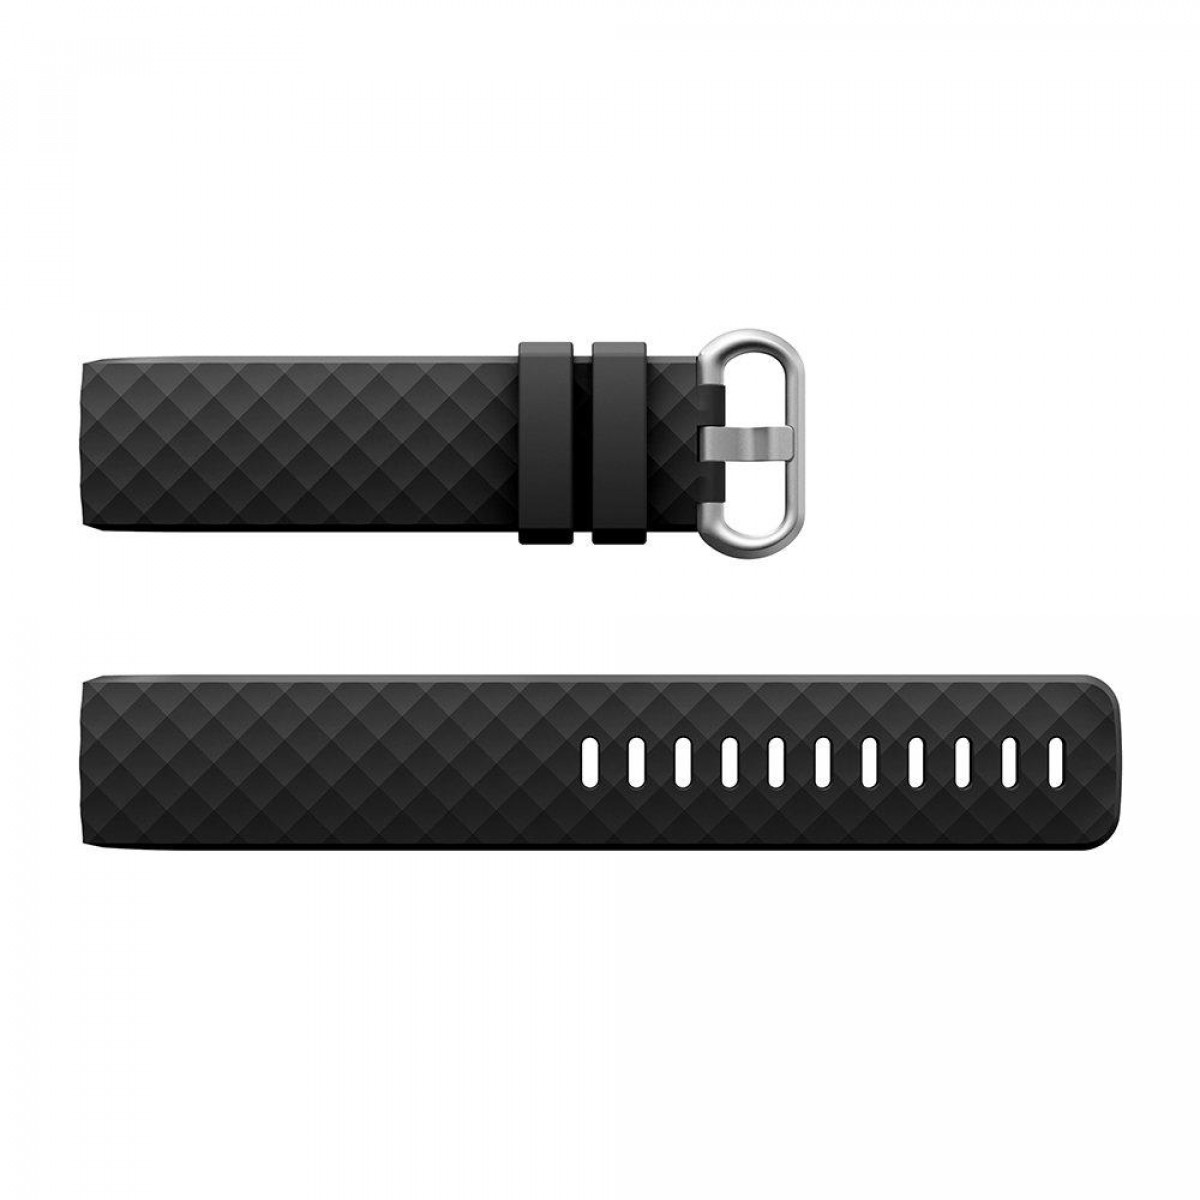 INF Fitbit Charge (S), Fitbit, Charge Schwarz 3/4 Ersatzarmband, Charge Schwarz 3/ Armband Silikon 4